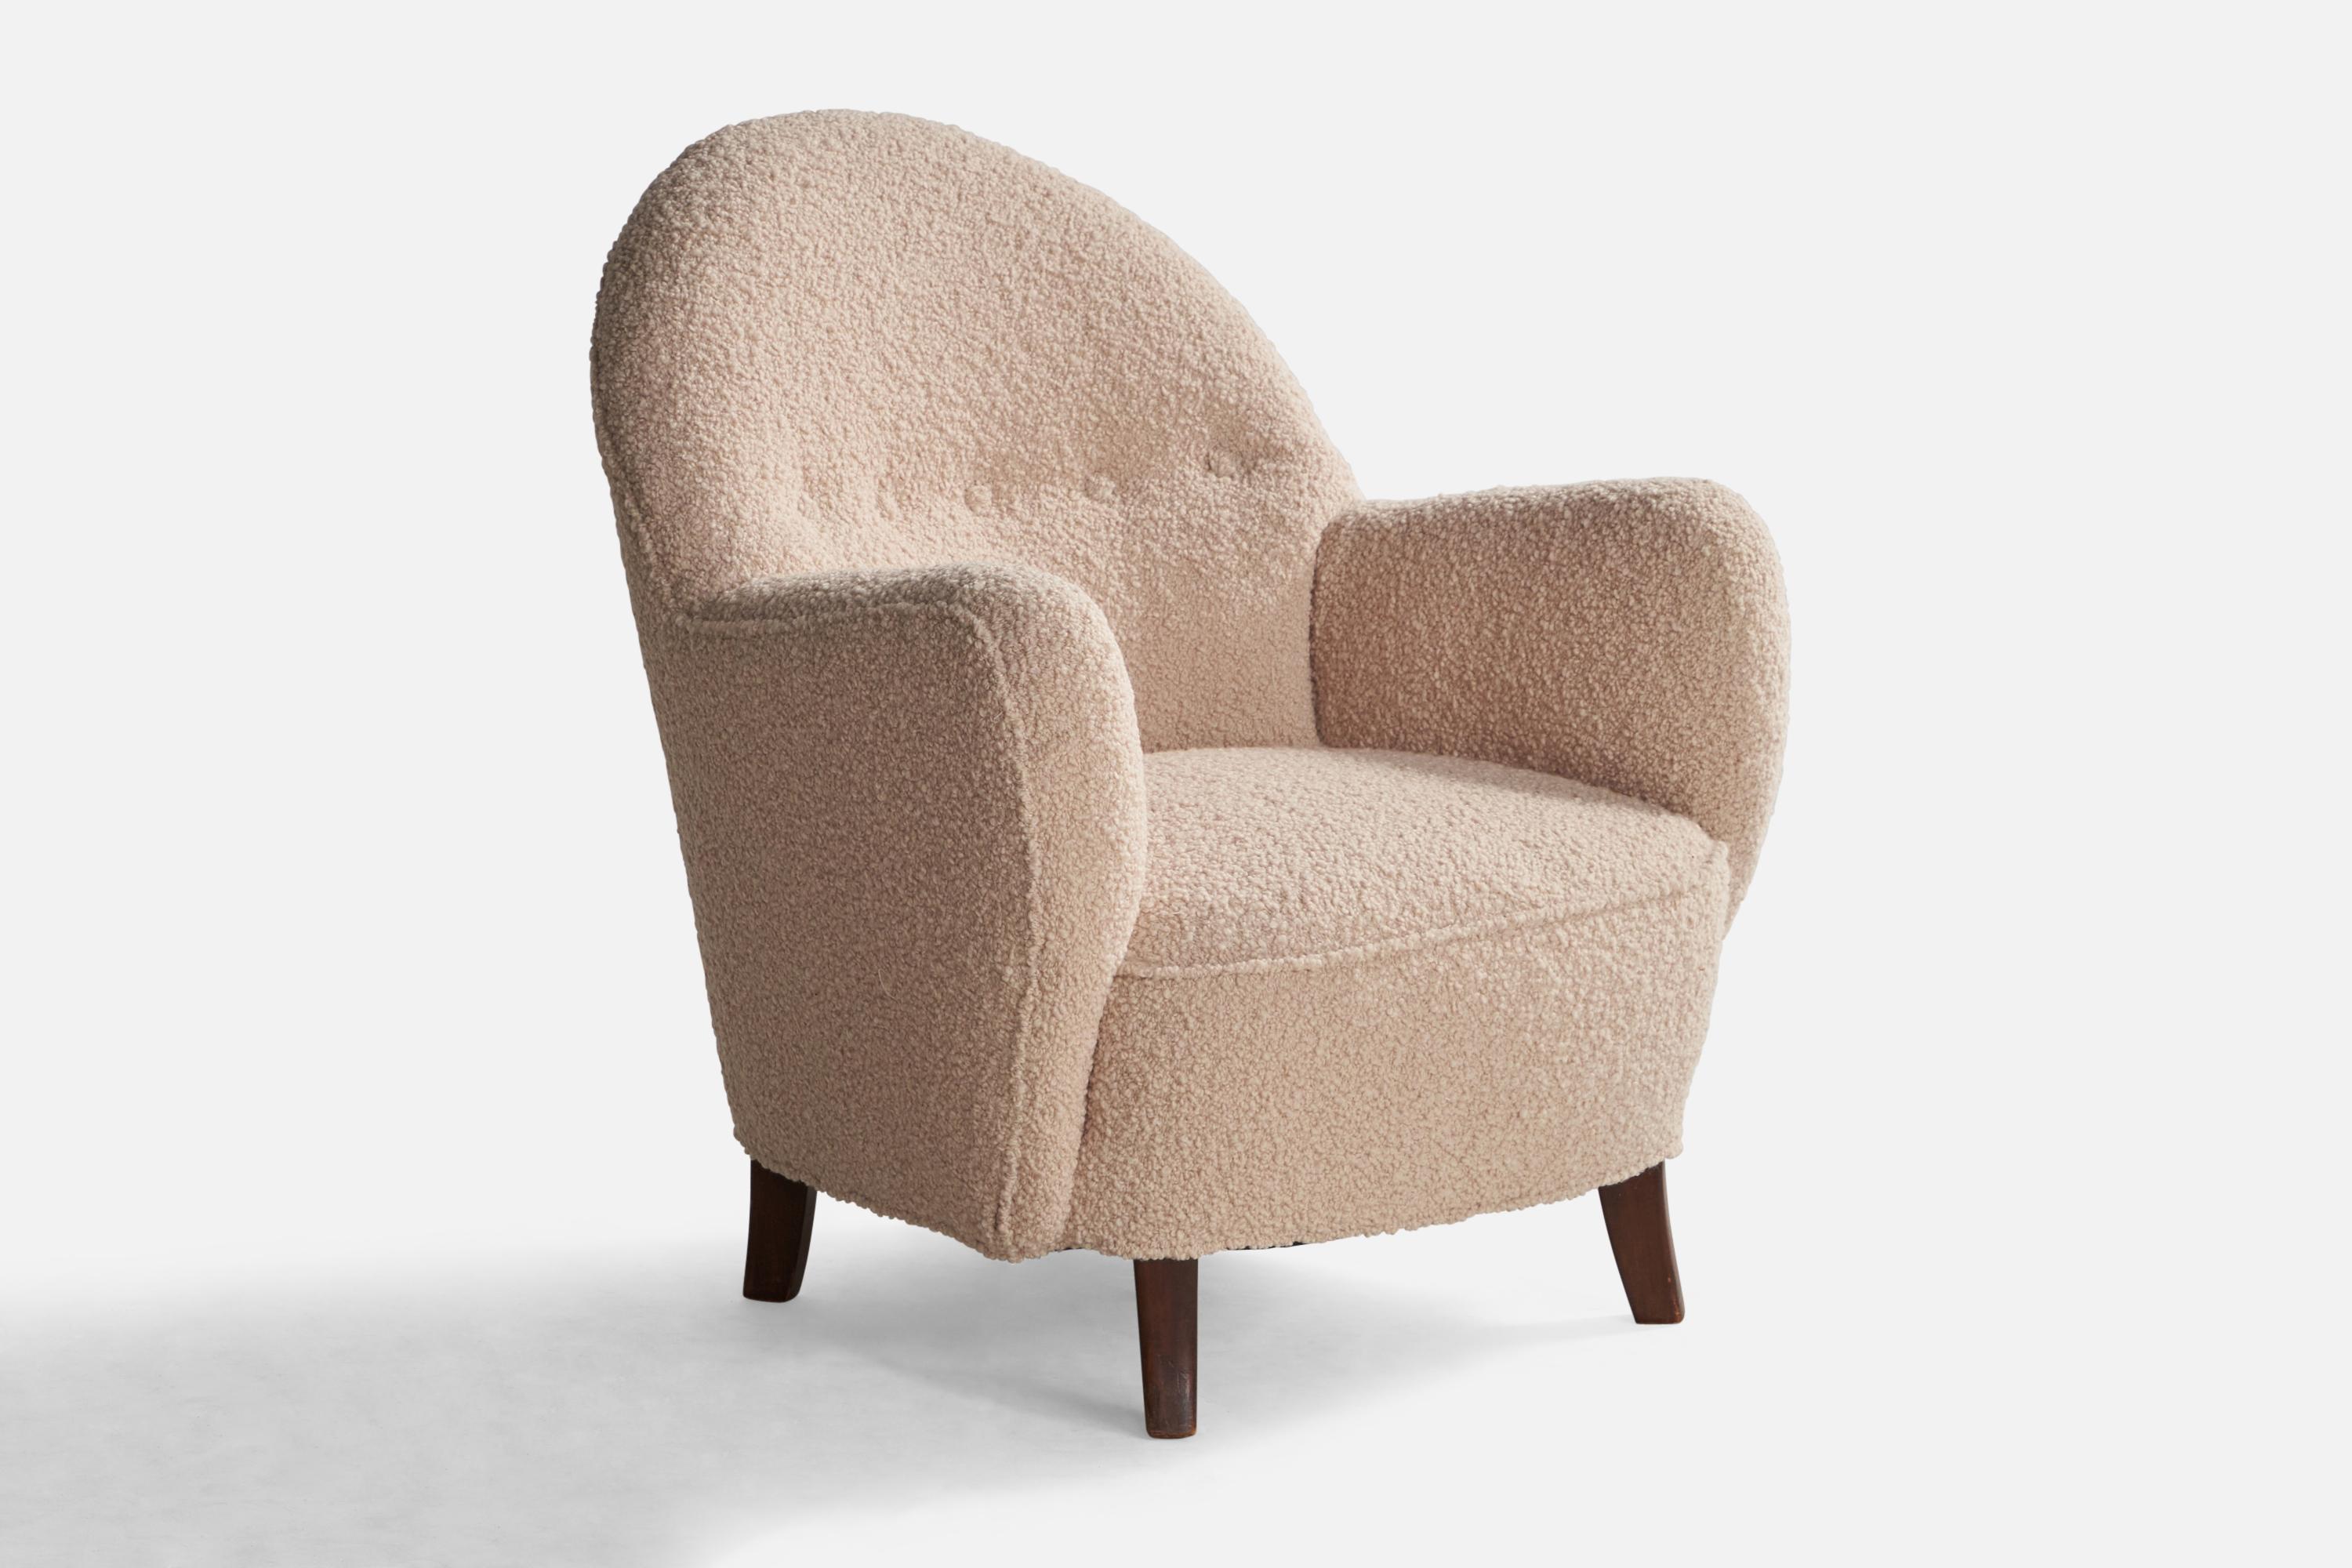 A dark-stained wood and light pink bouclé fabric lounge chair designed and produced by George Kofoed, Denmark, 1940s.

Seat height: 14.5”